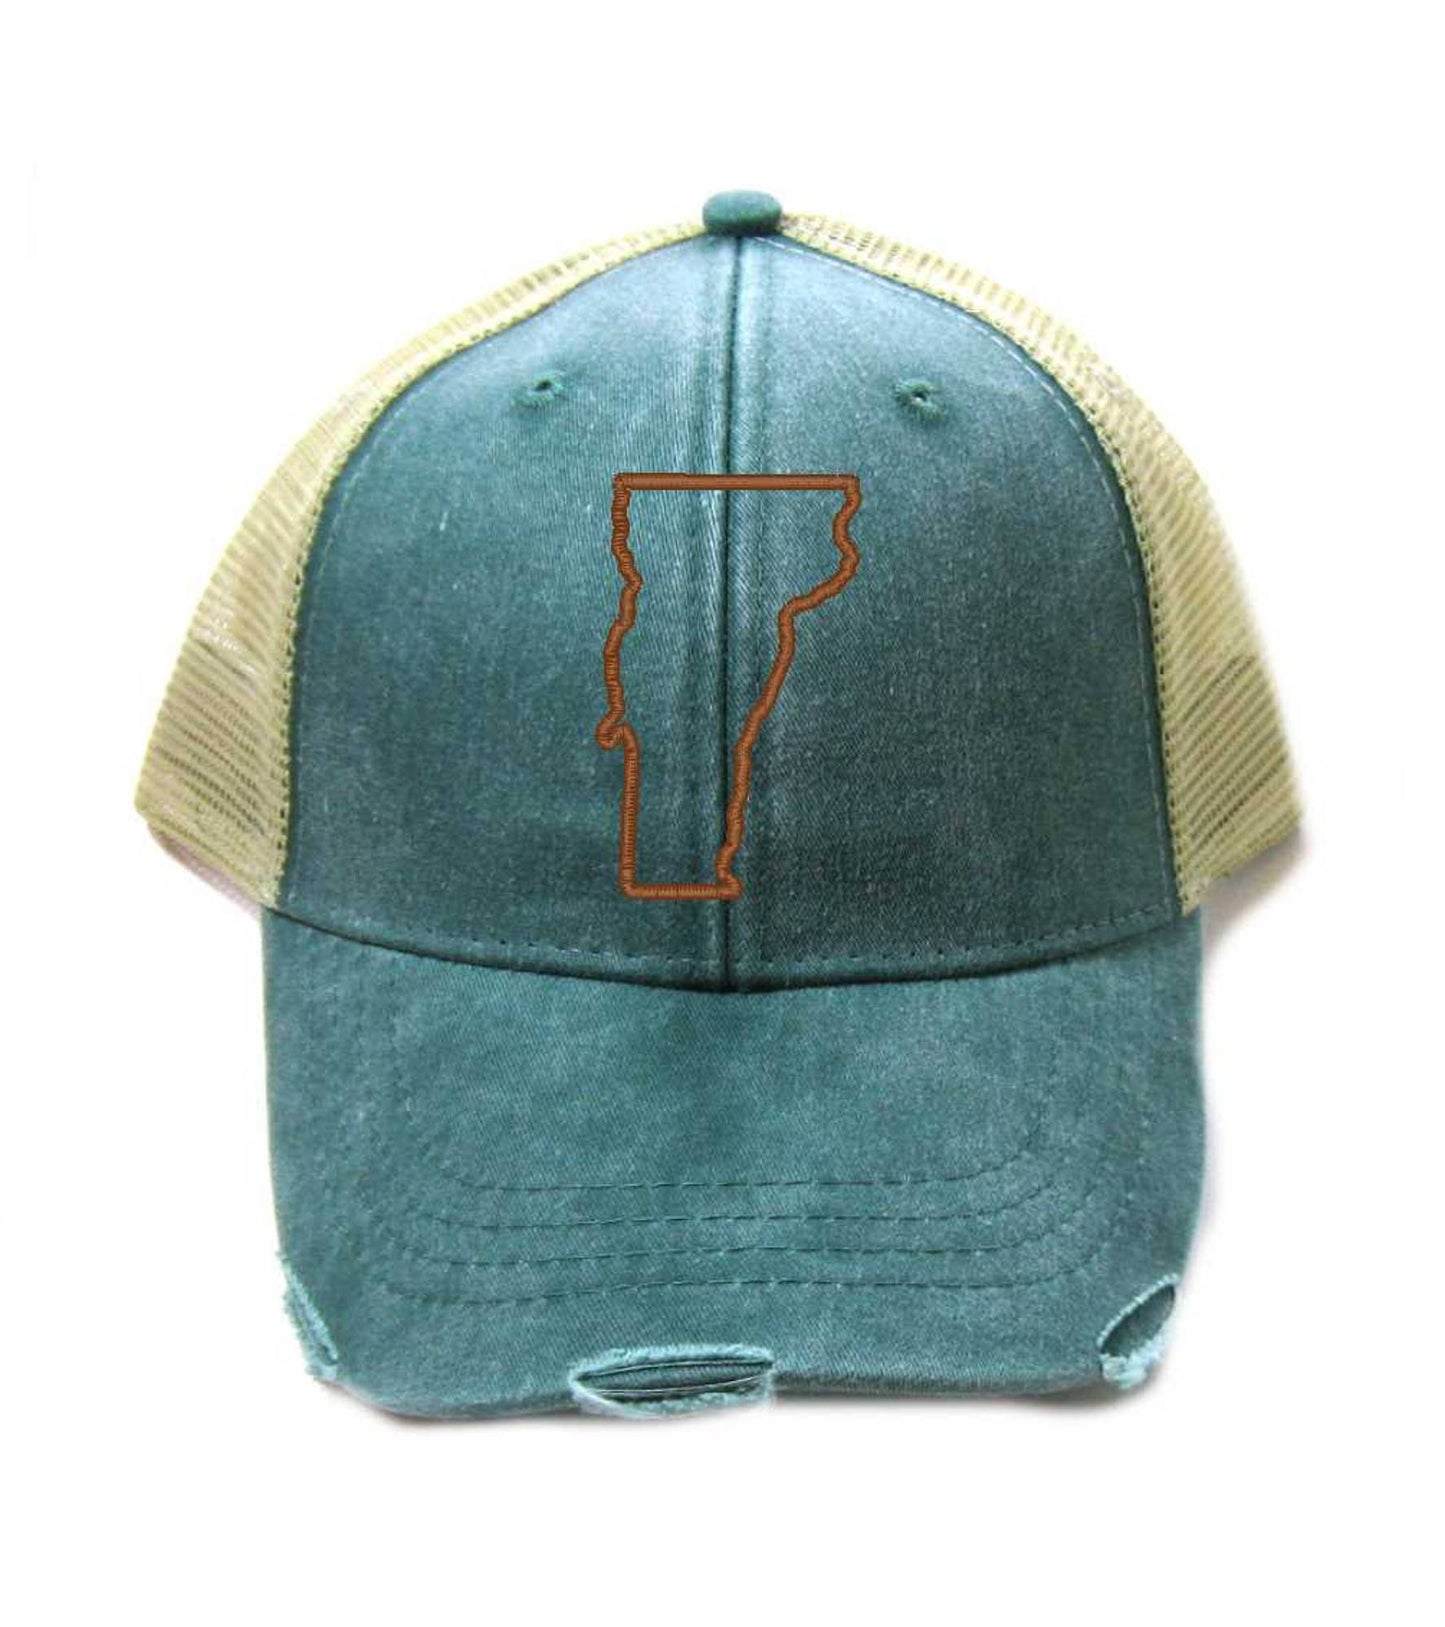 Vermont Hat - Distressed Snapback Trucker Hat - Vermont State Outline - Many Colors Available